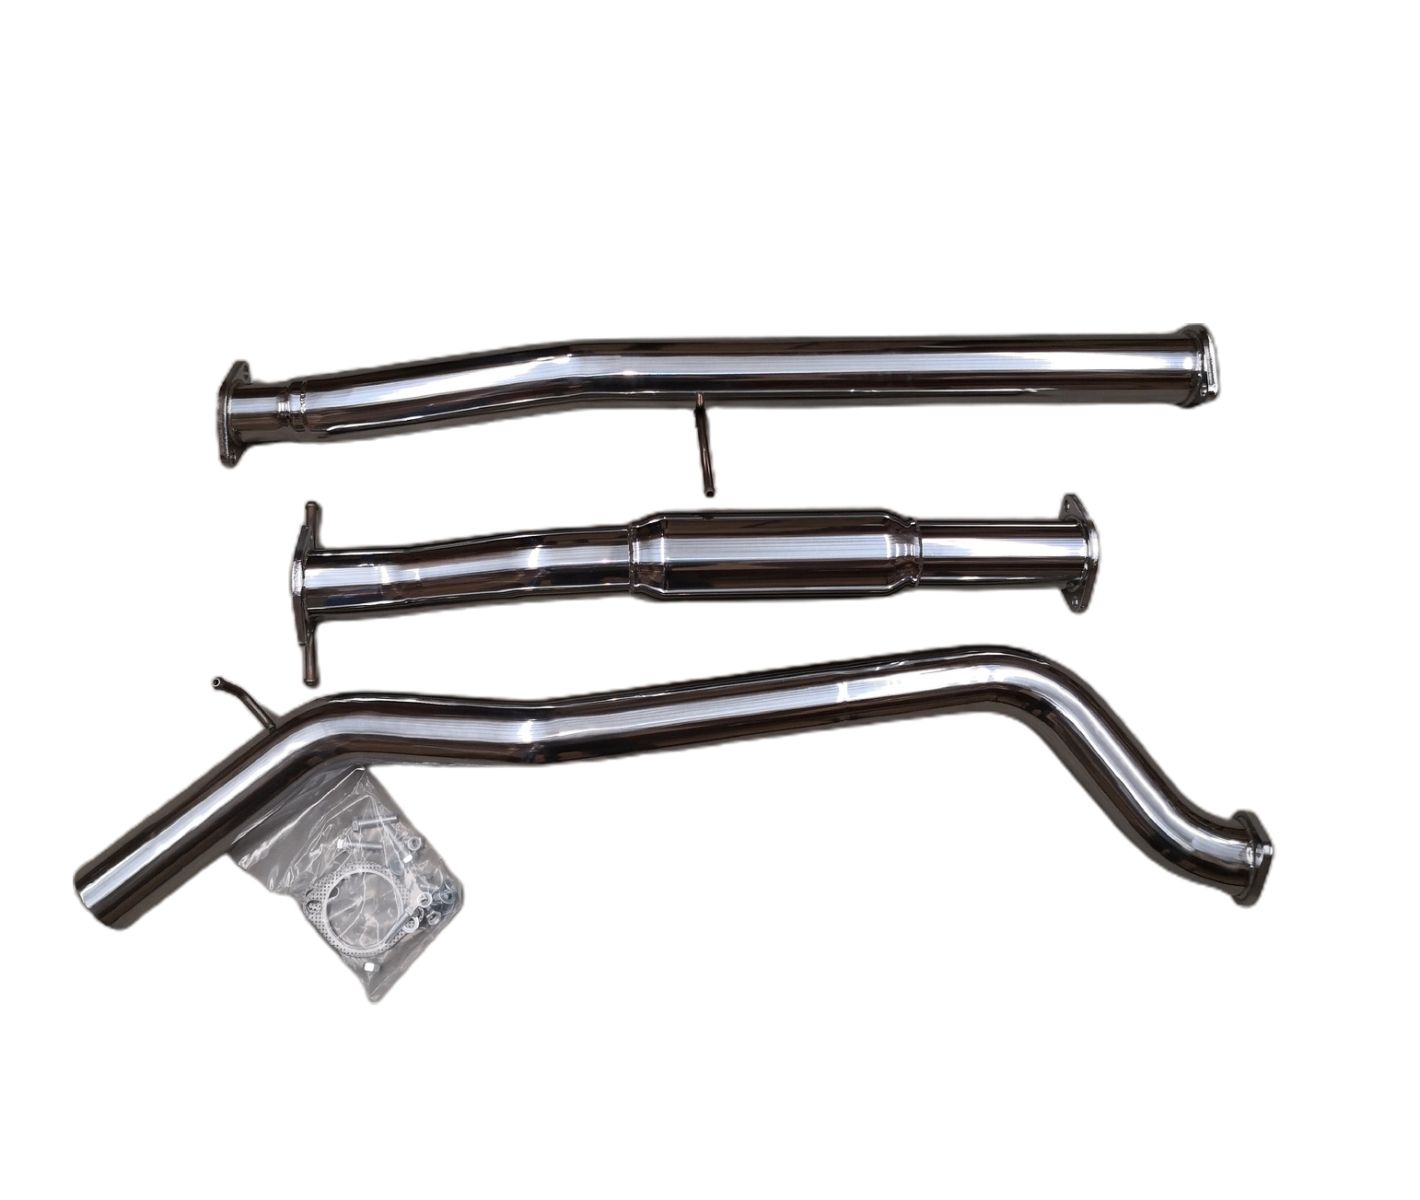 ford-ranger-dpf-back-exhaust-3-inch